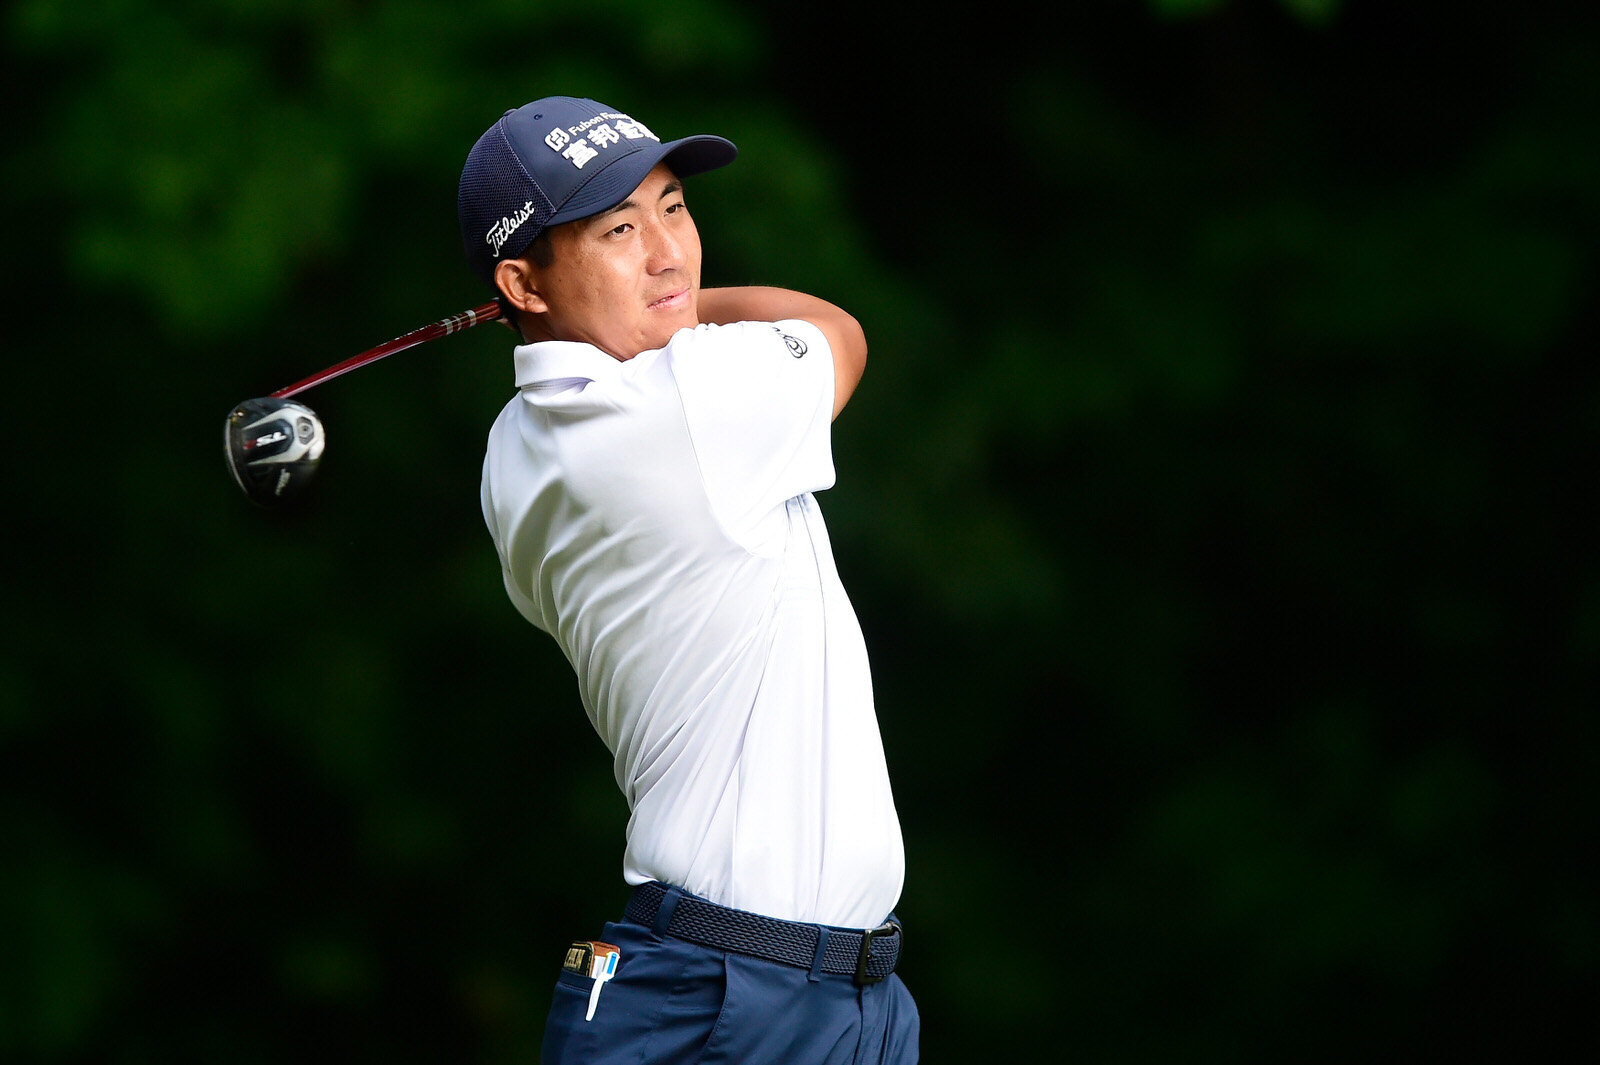  GREENSBORO, NORTH CAROLINA - AUGUST 14: C.T. Pan of Taiwan plays his shot from the second tee during the second round of the Wyndham Championship at  Sedgefield Country Club on August 14, 2020 in Greensboro, North Carolina. (Photo by Jared C. Tilton